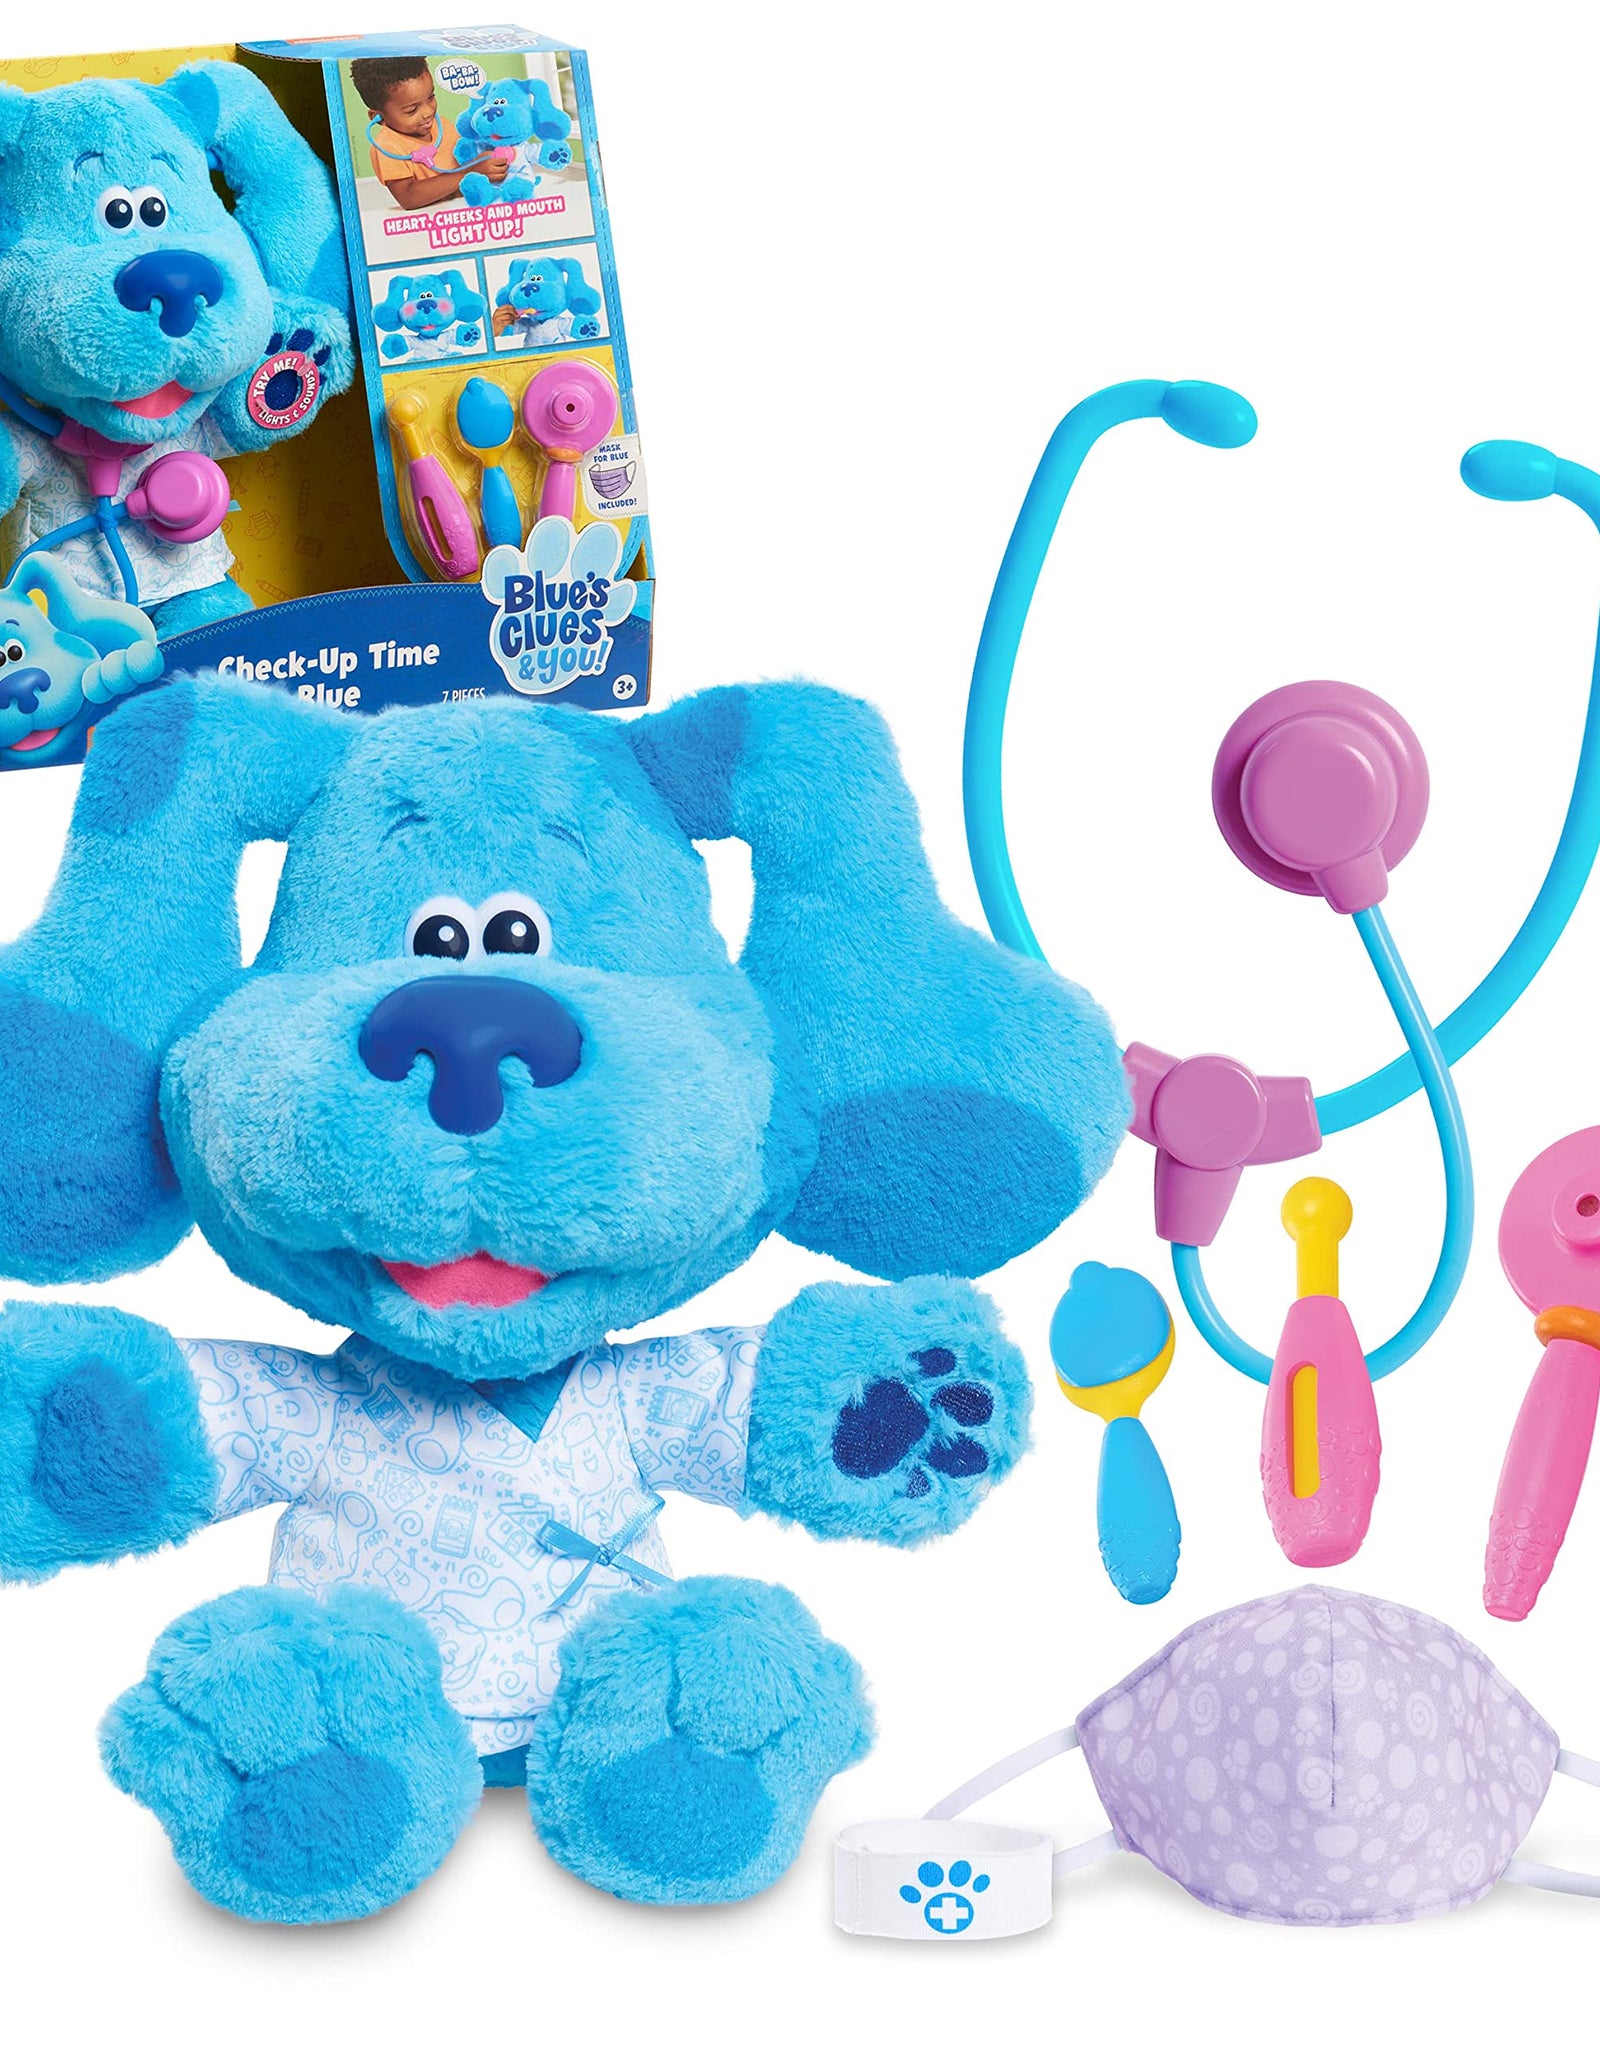 Blue's Clues & You! Check-Up Time Blue Lights and Sounds Interactive 13-Inch Plush, 7-Piece Pretend Play Doctor Set, by Just Play